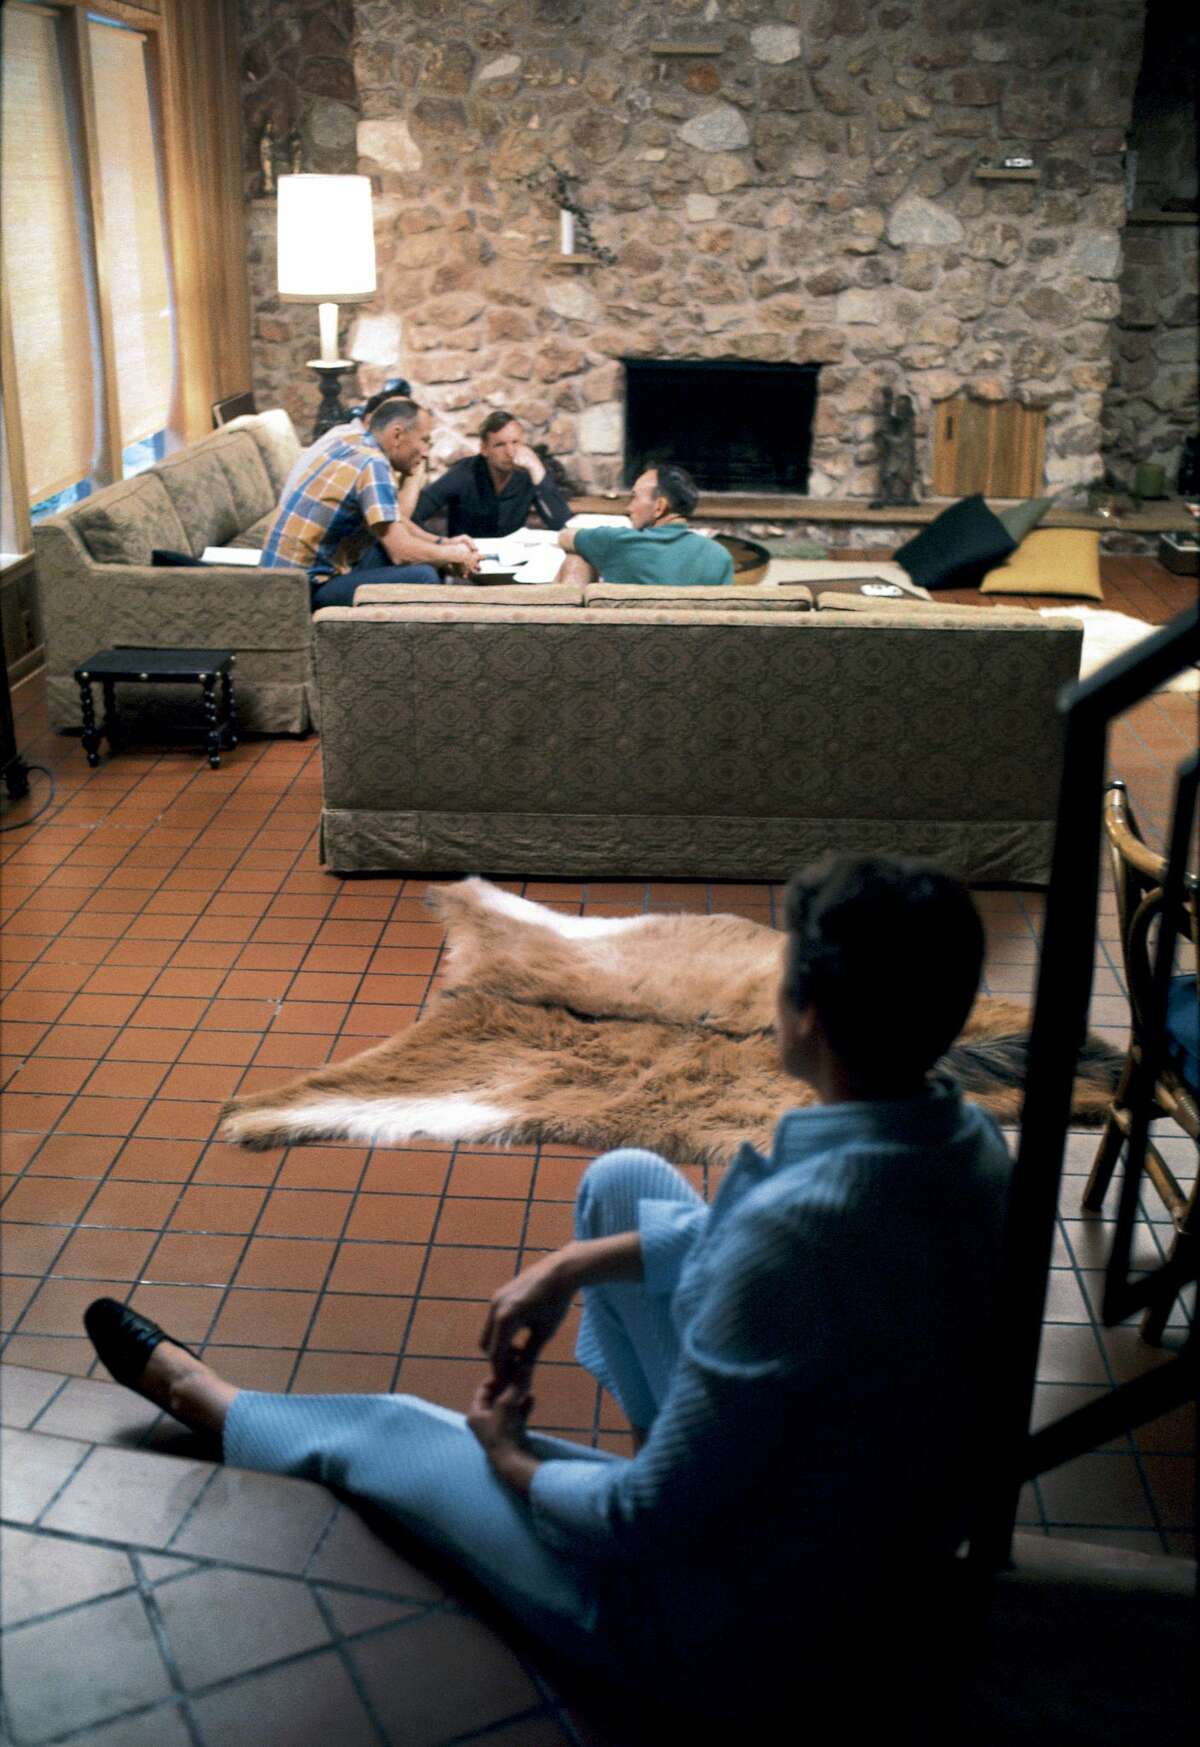 Neil Armstrong and his fellow Apollo 11 astronauts Buzz Aldrin & Michael Collins talk amongst themselves in the living room of the home in 1969.